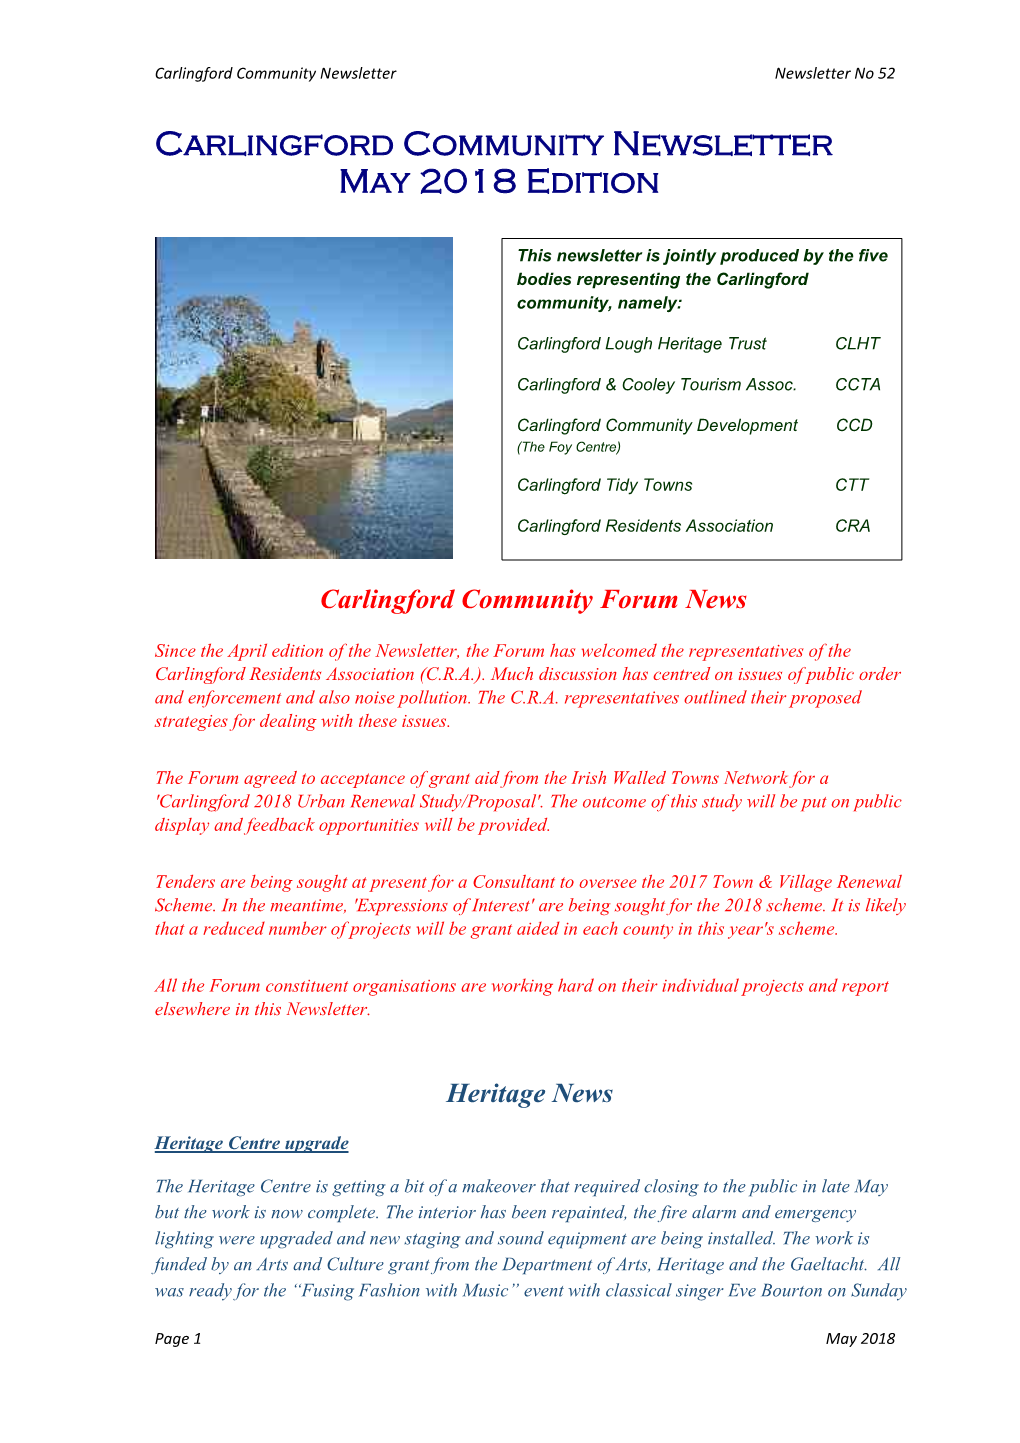 Carlingford Community Newsletter May 2018 Edition